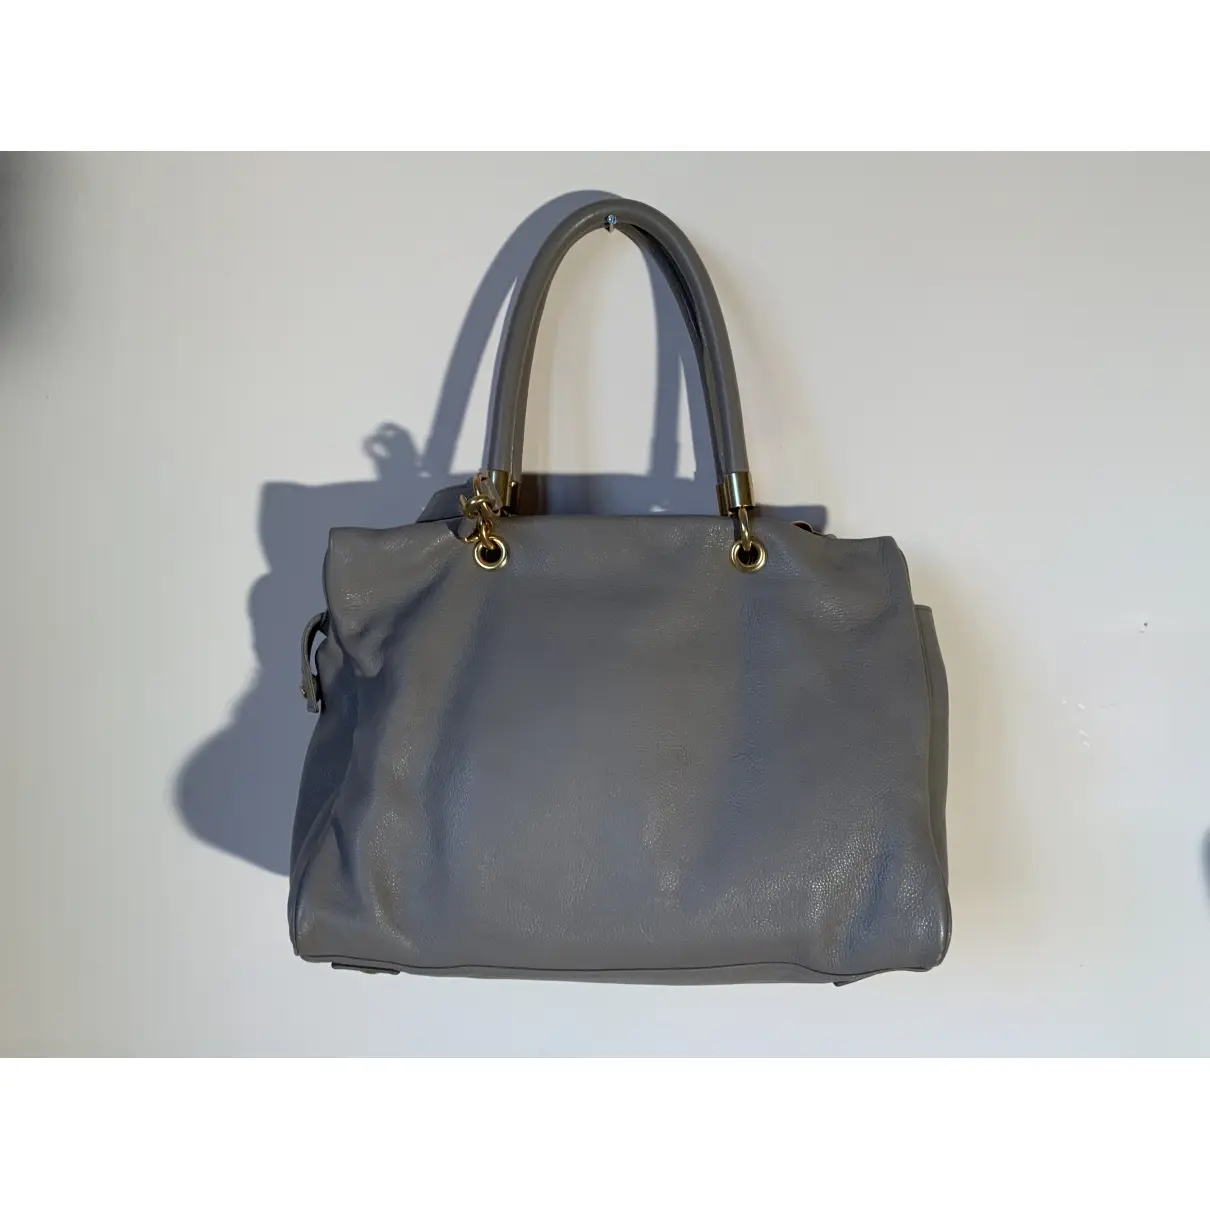 Buy Marc by Marc Jacobs Leather handbag online